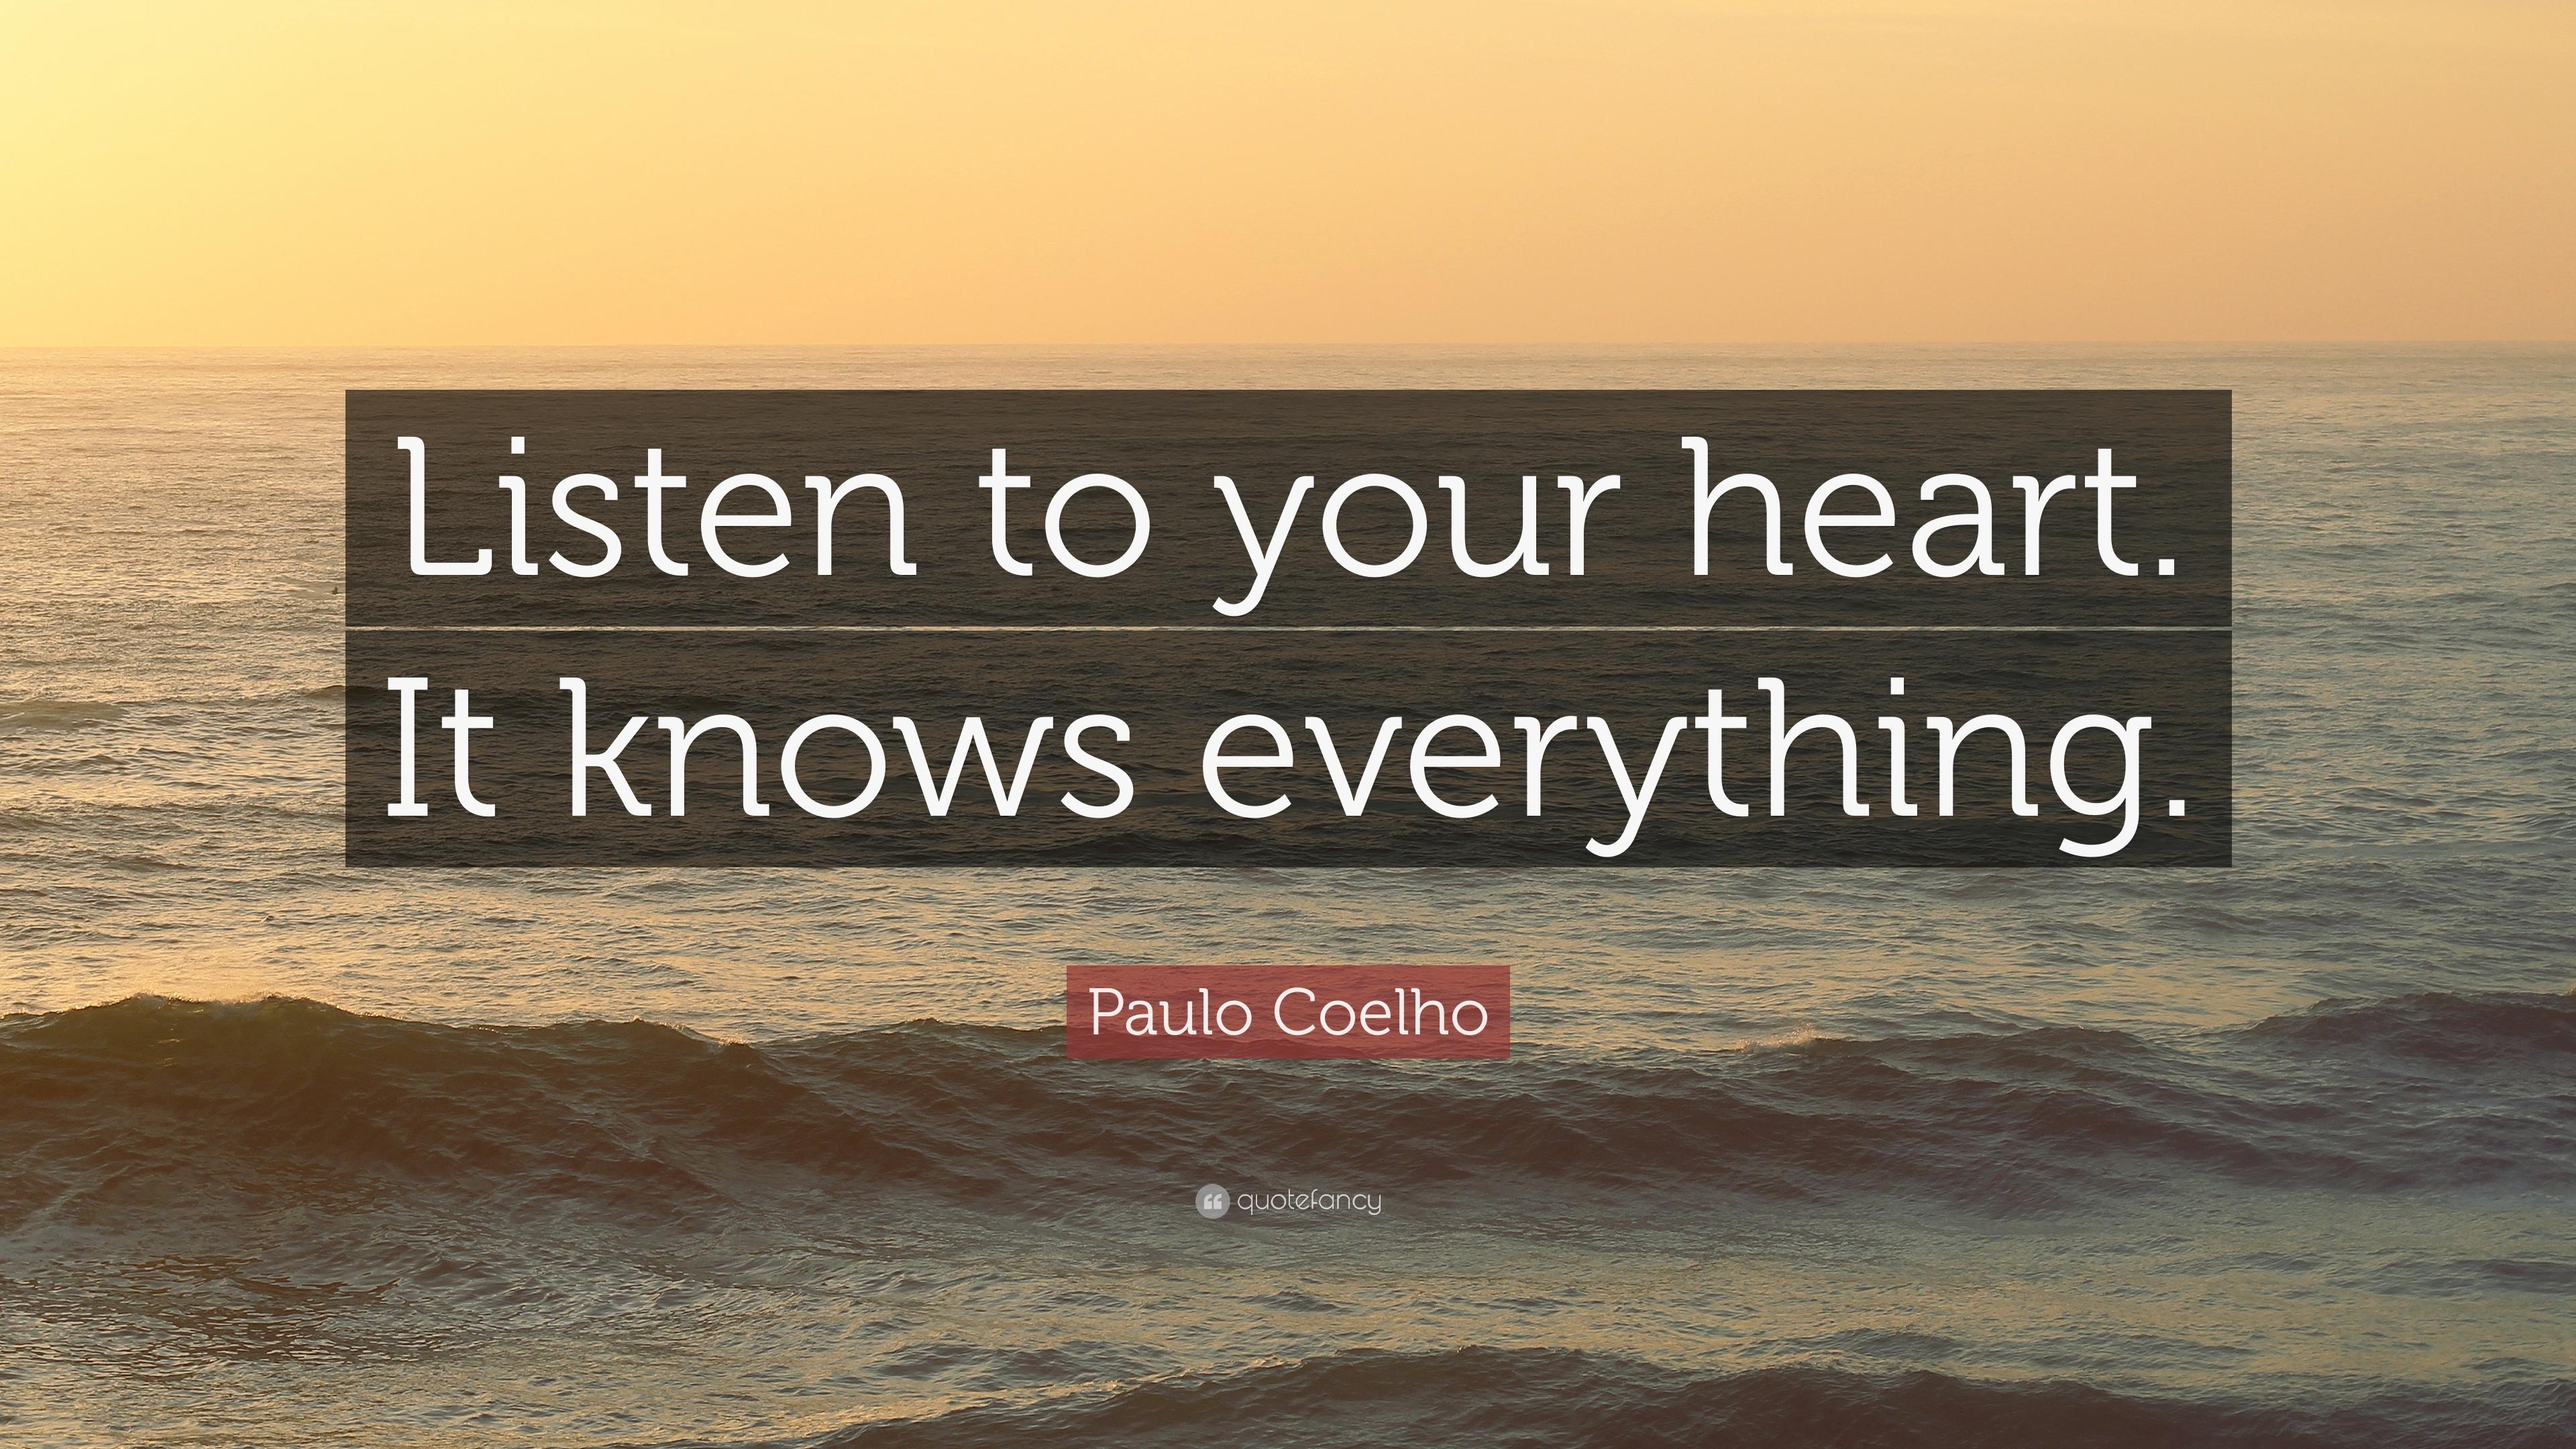 Paulo Coelho Quote: “Listen to your heart. It knows everything.” 12